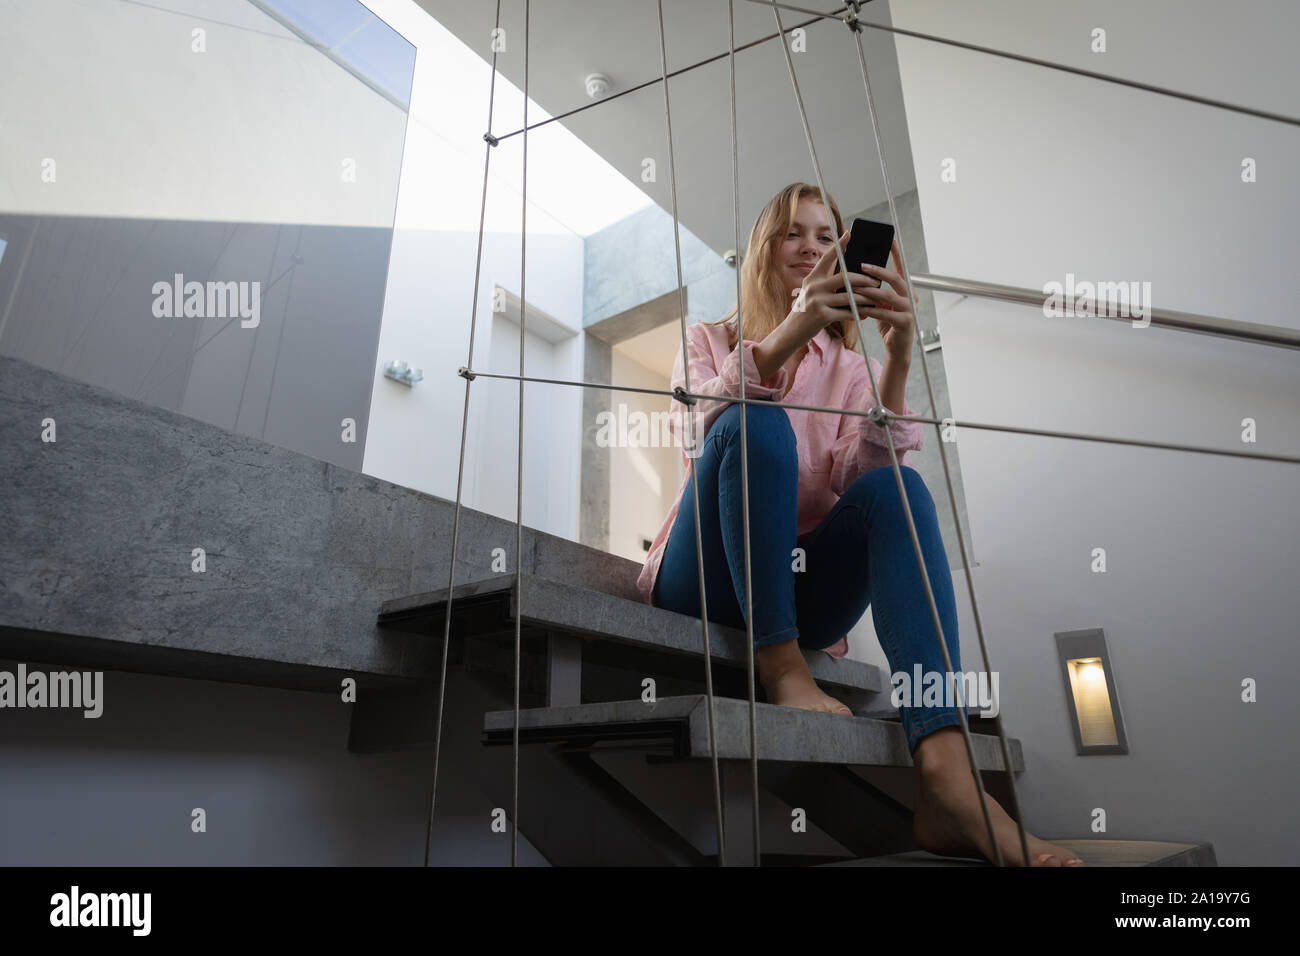 Jeune blonde sitting on stairs woman using smartphone Banque D'Images